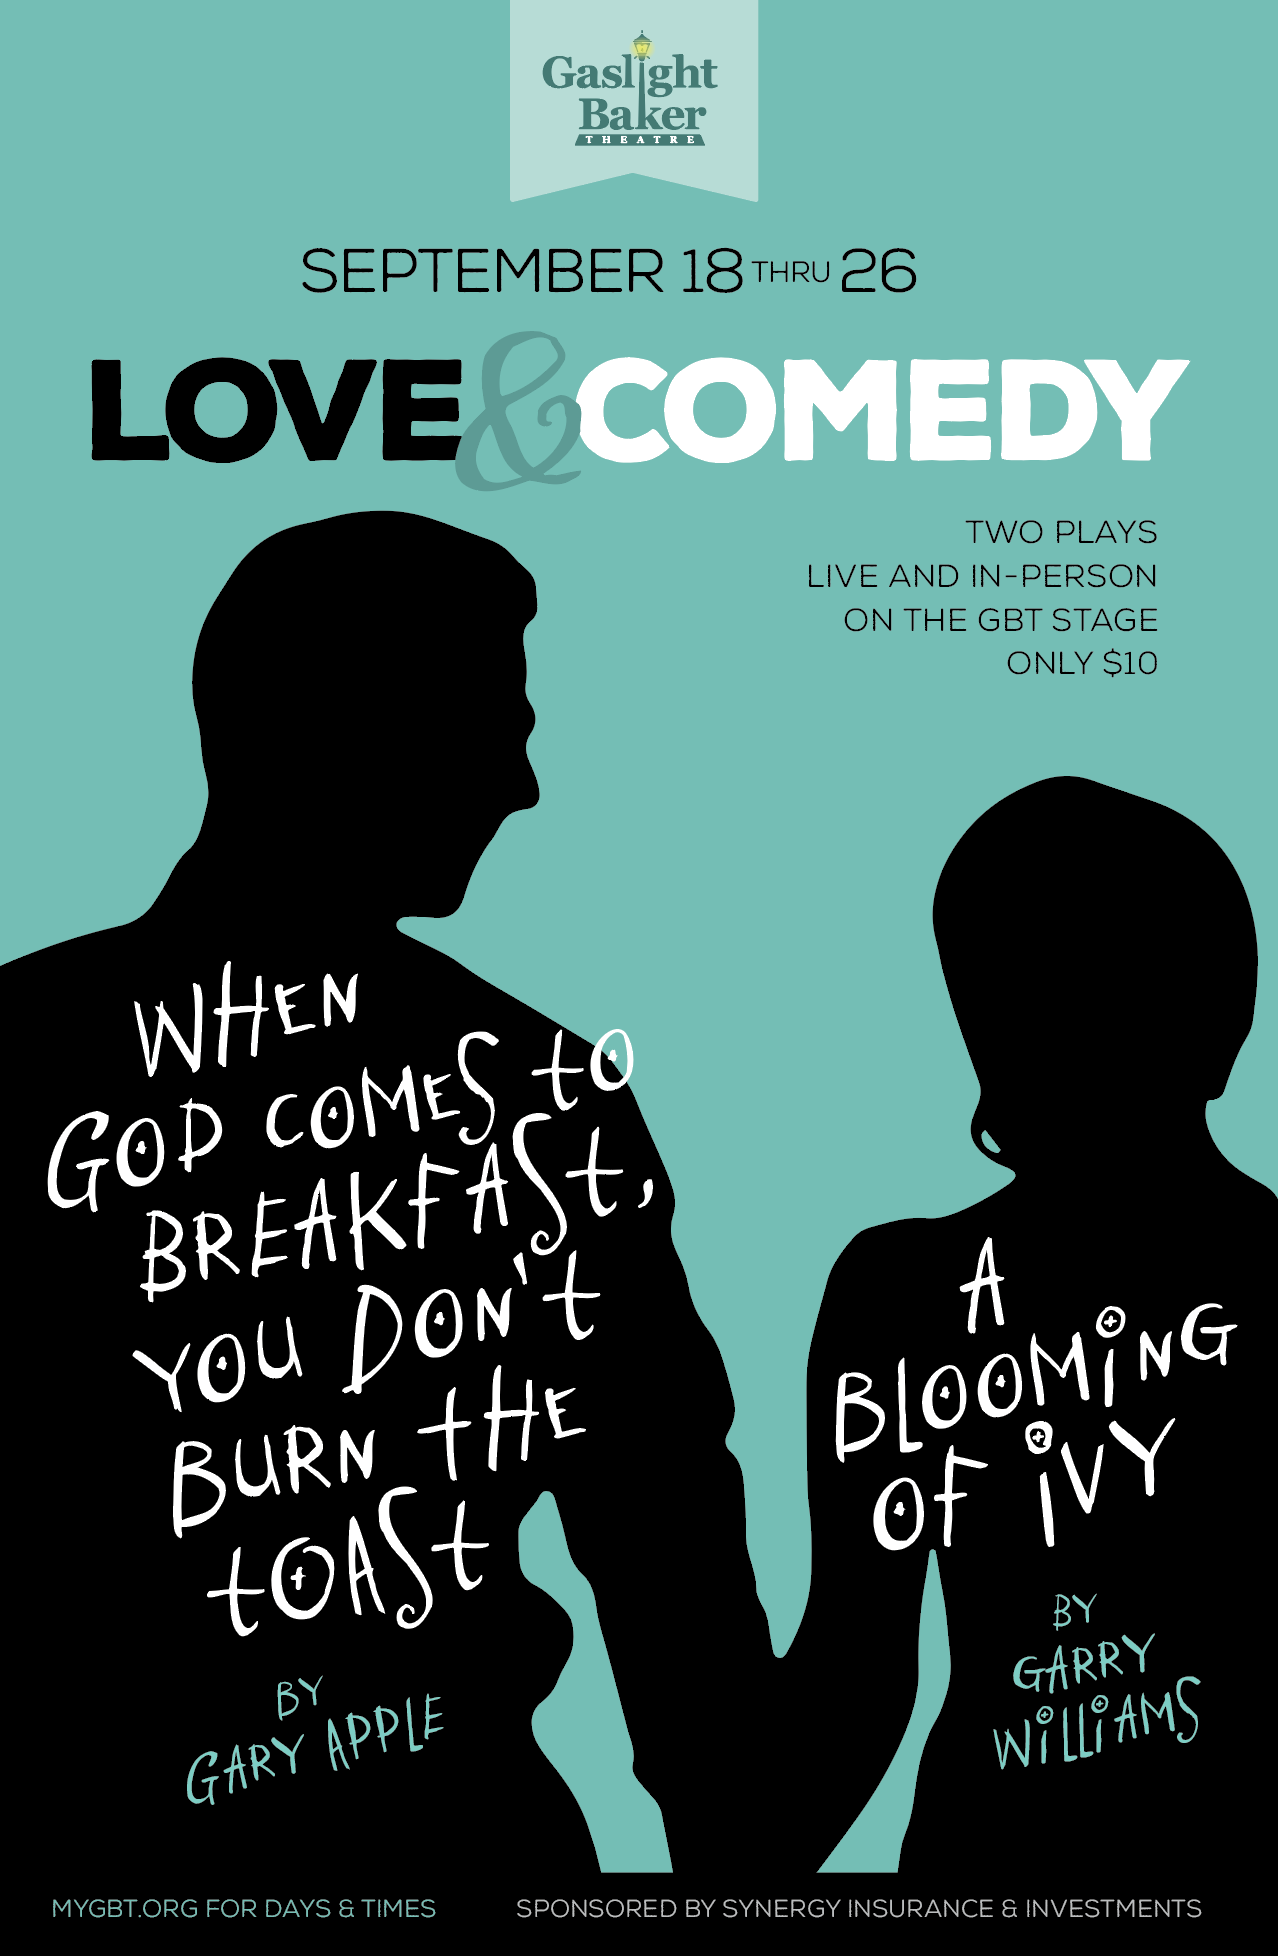 Love & Comedy - Two One-Act Plays by Gaslight Baker Theatre